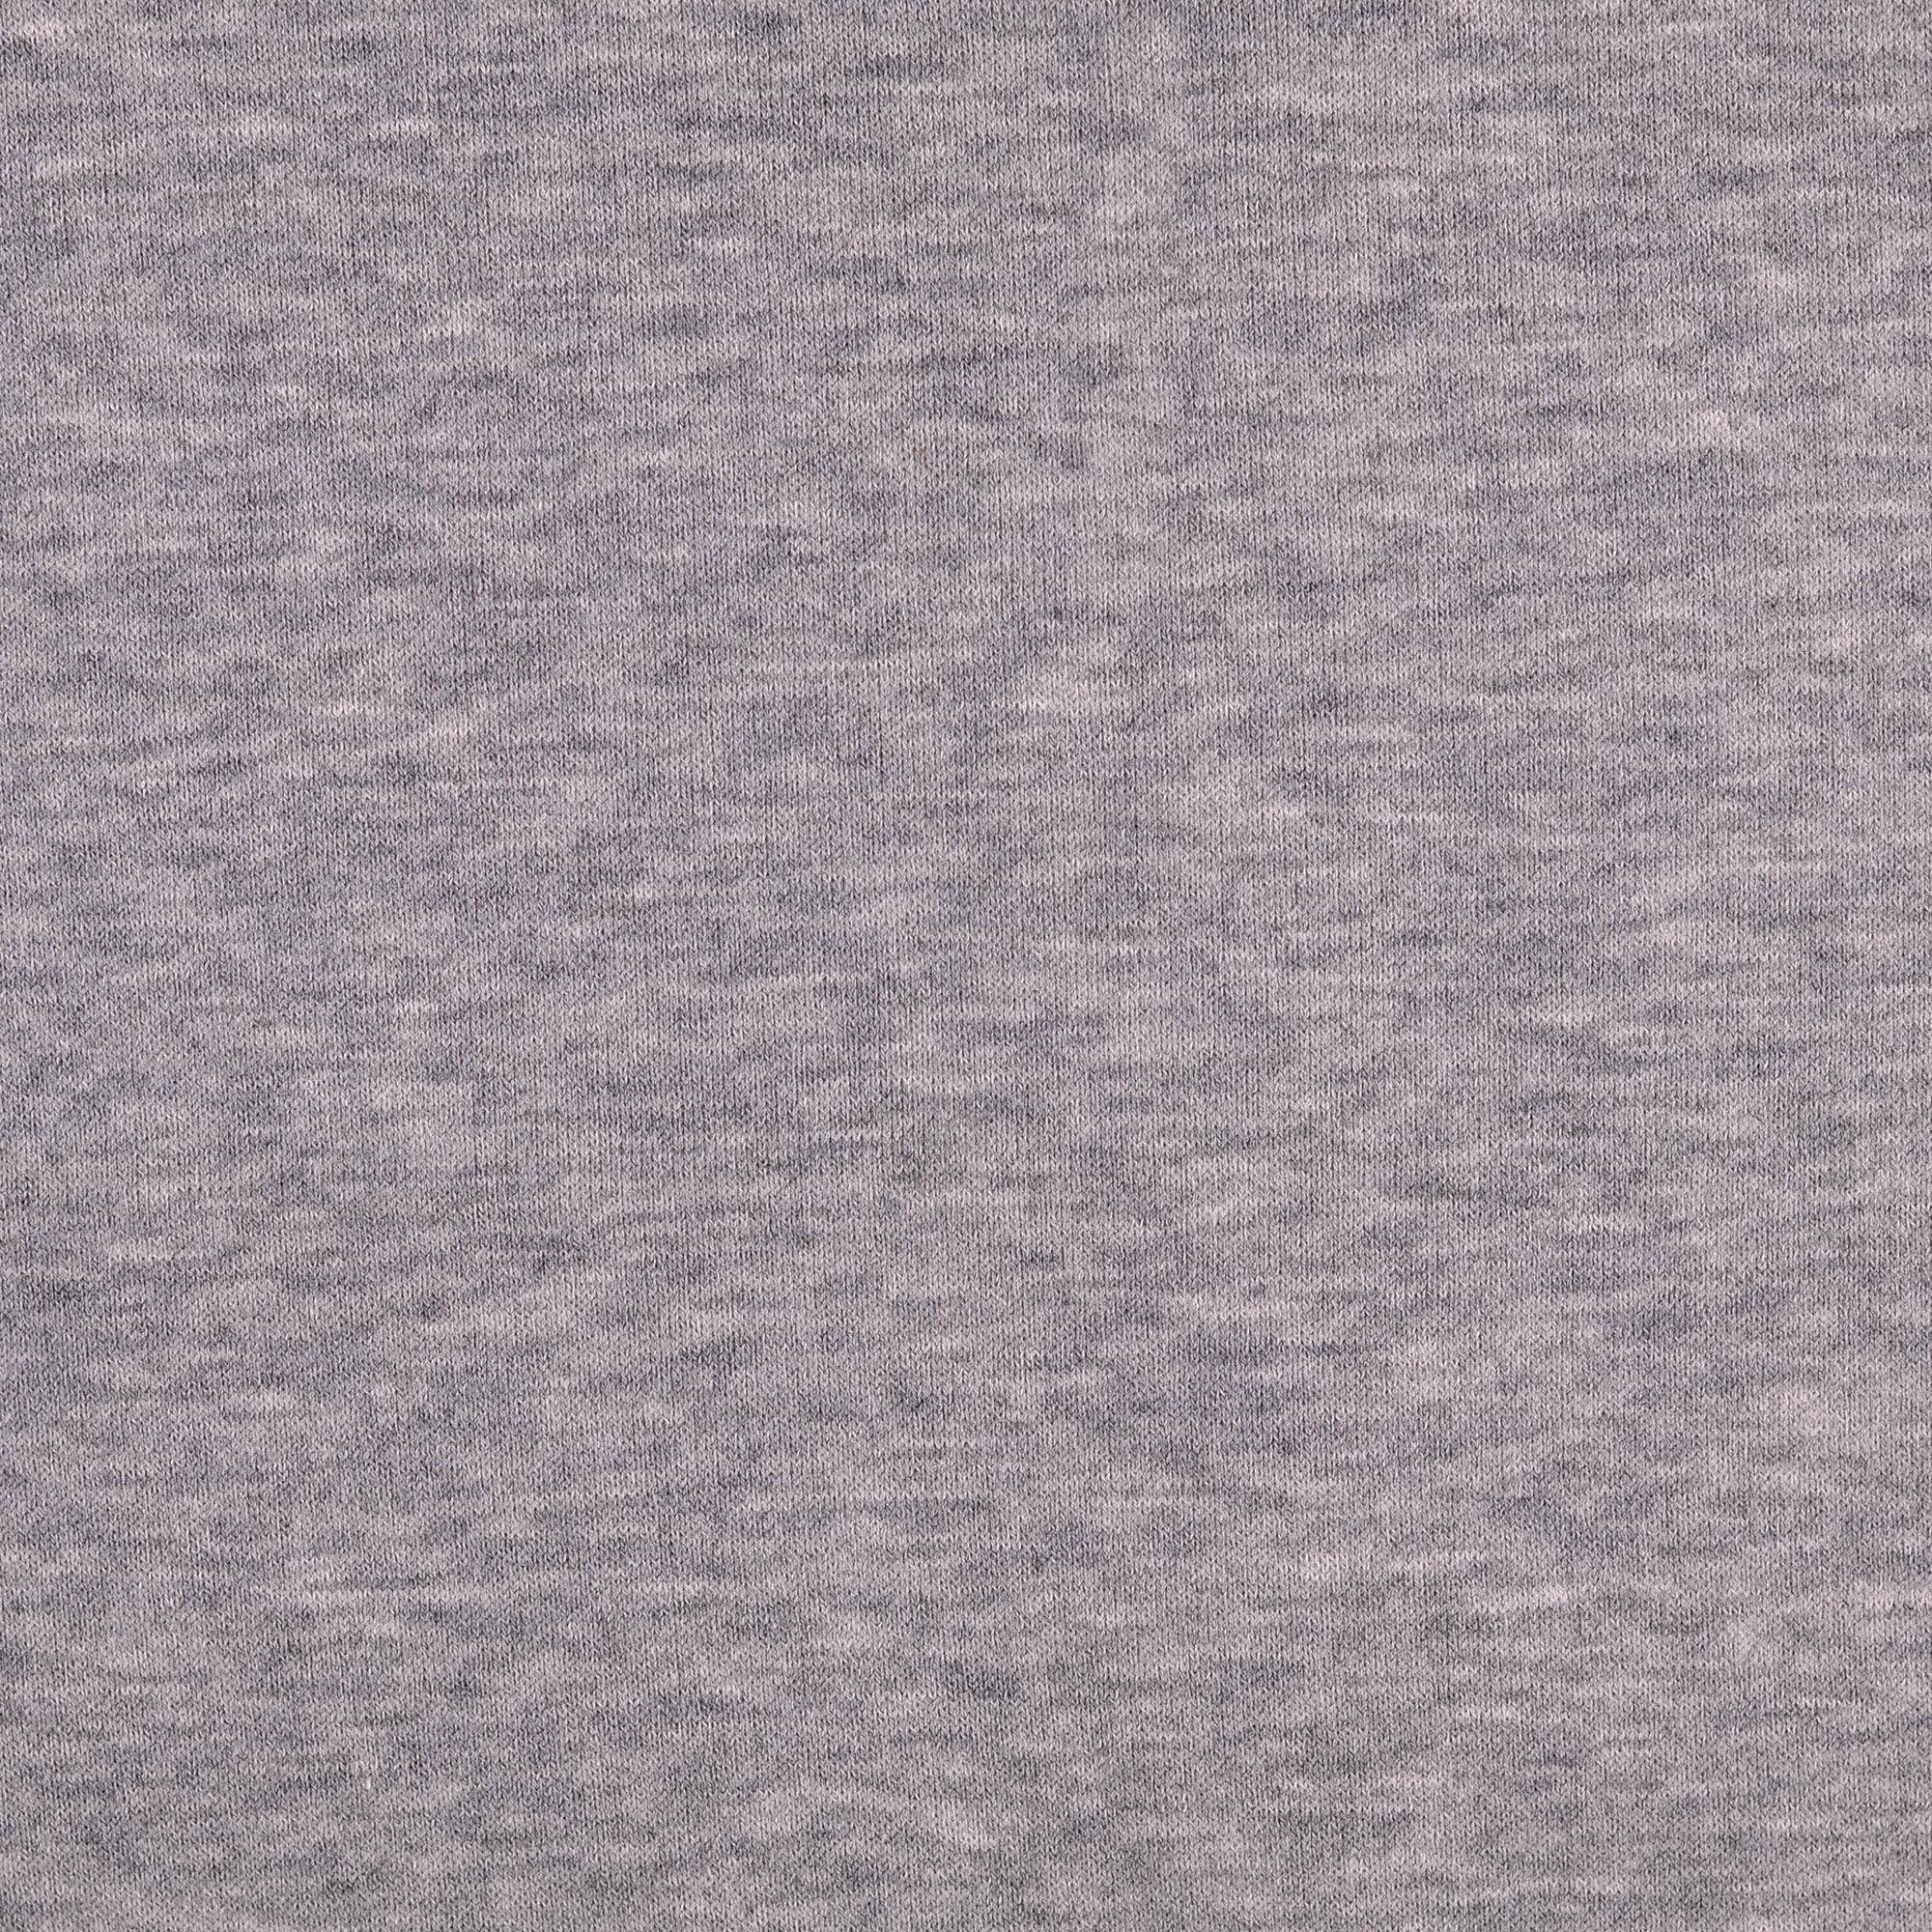 Comfy Viscose Blend Sweater Knit in Grey